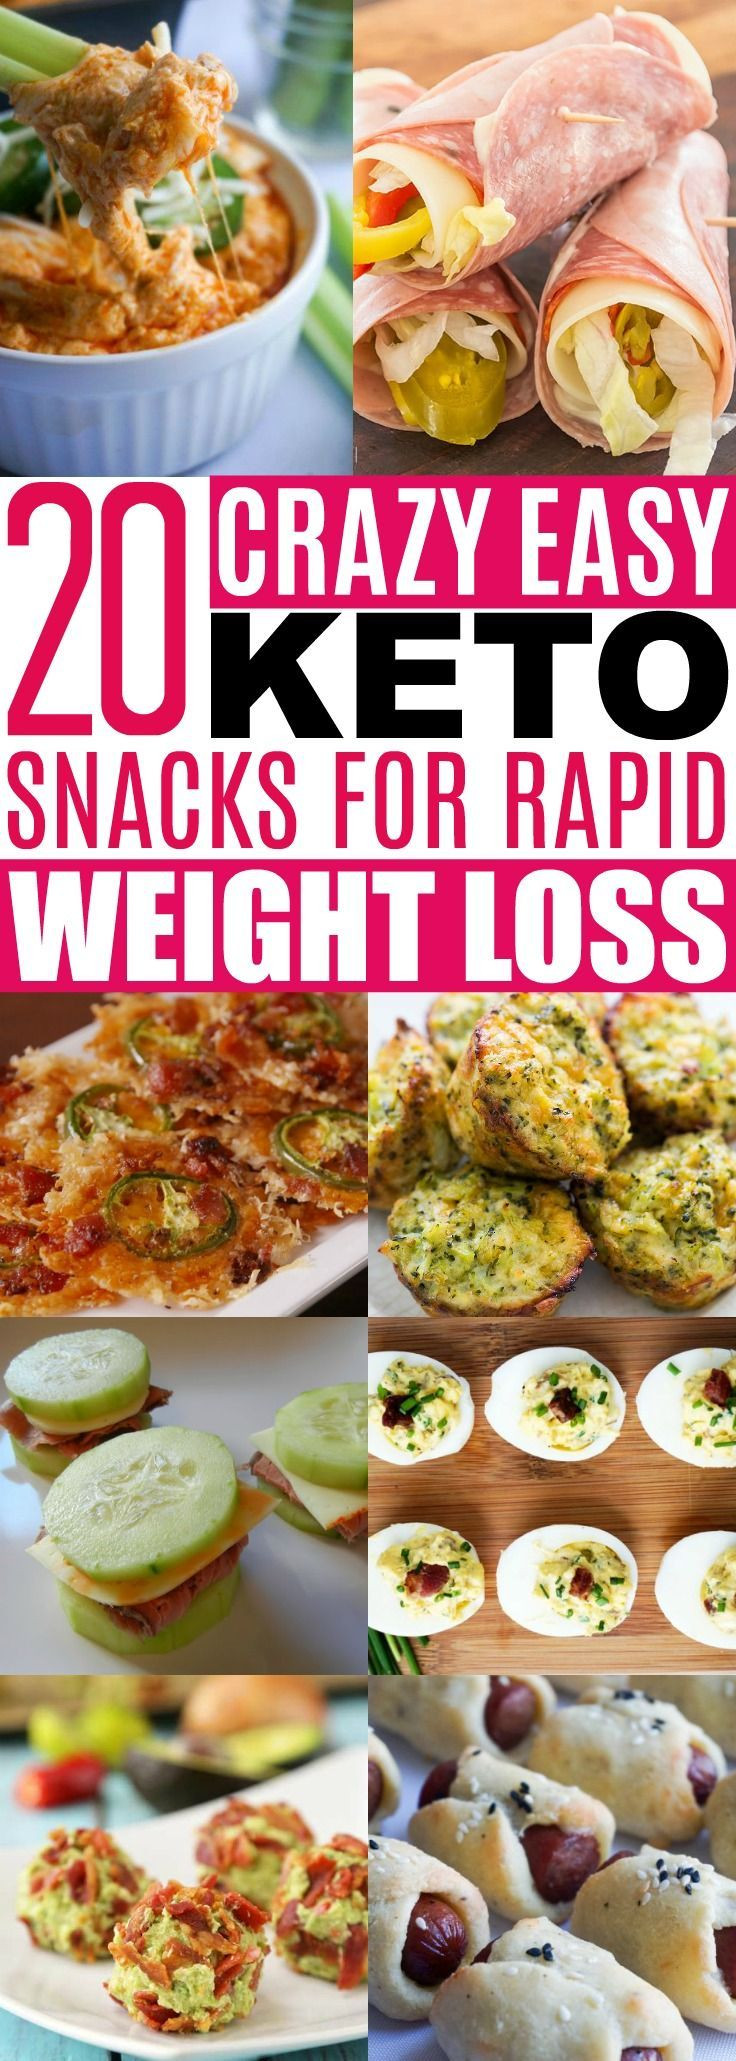 Clean Keto Snacks
 809 best LOW CARB SNACKS KETO LCHF images on Pinterest